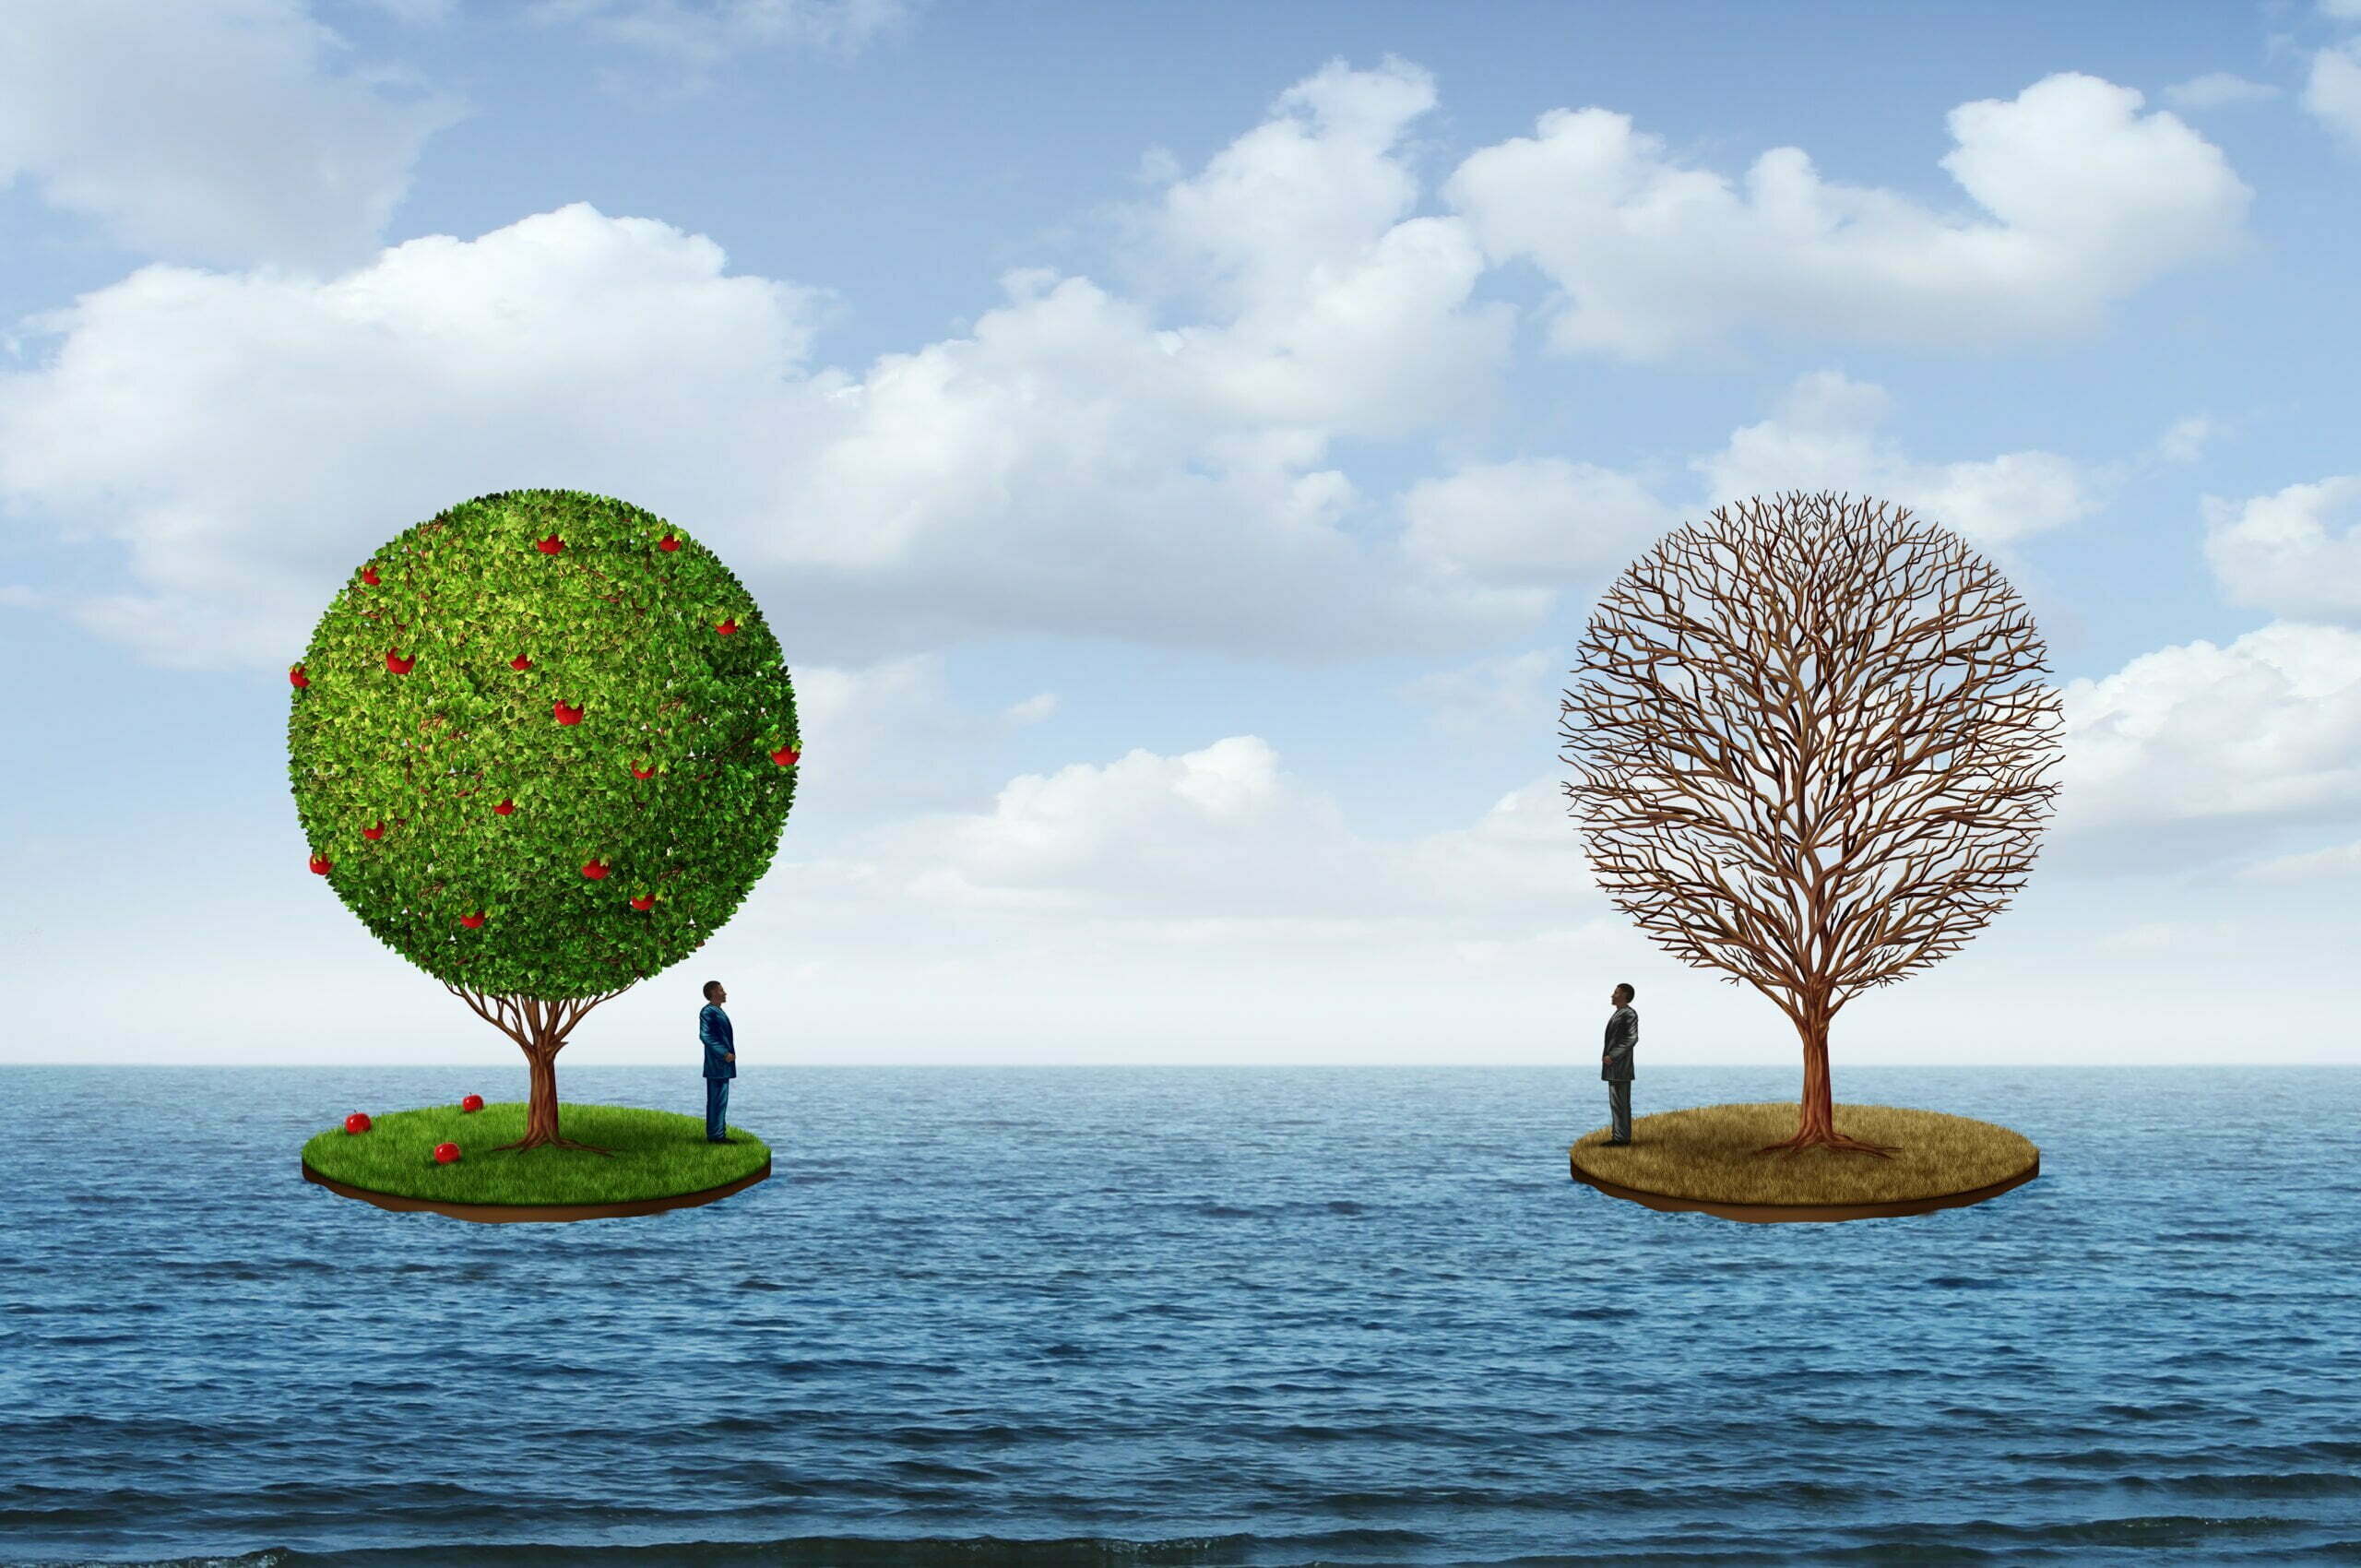 illustration of two islands, each with a tree and a man standing on the island. one tree is lush and green. the other tree is brown and barren.